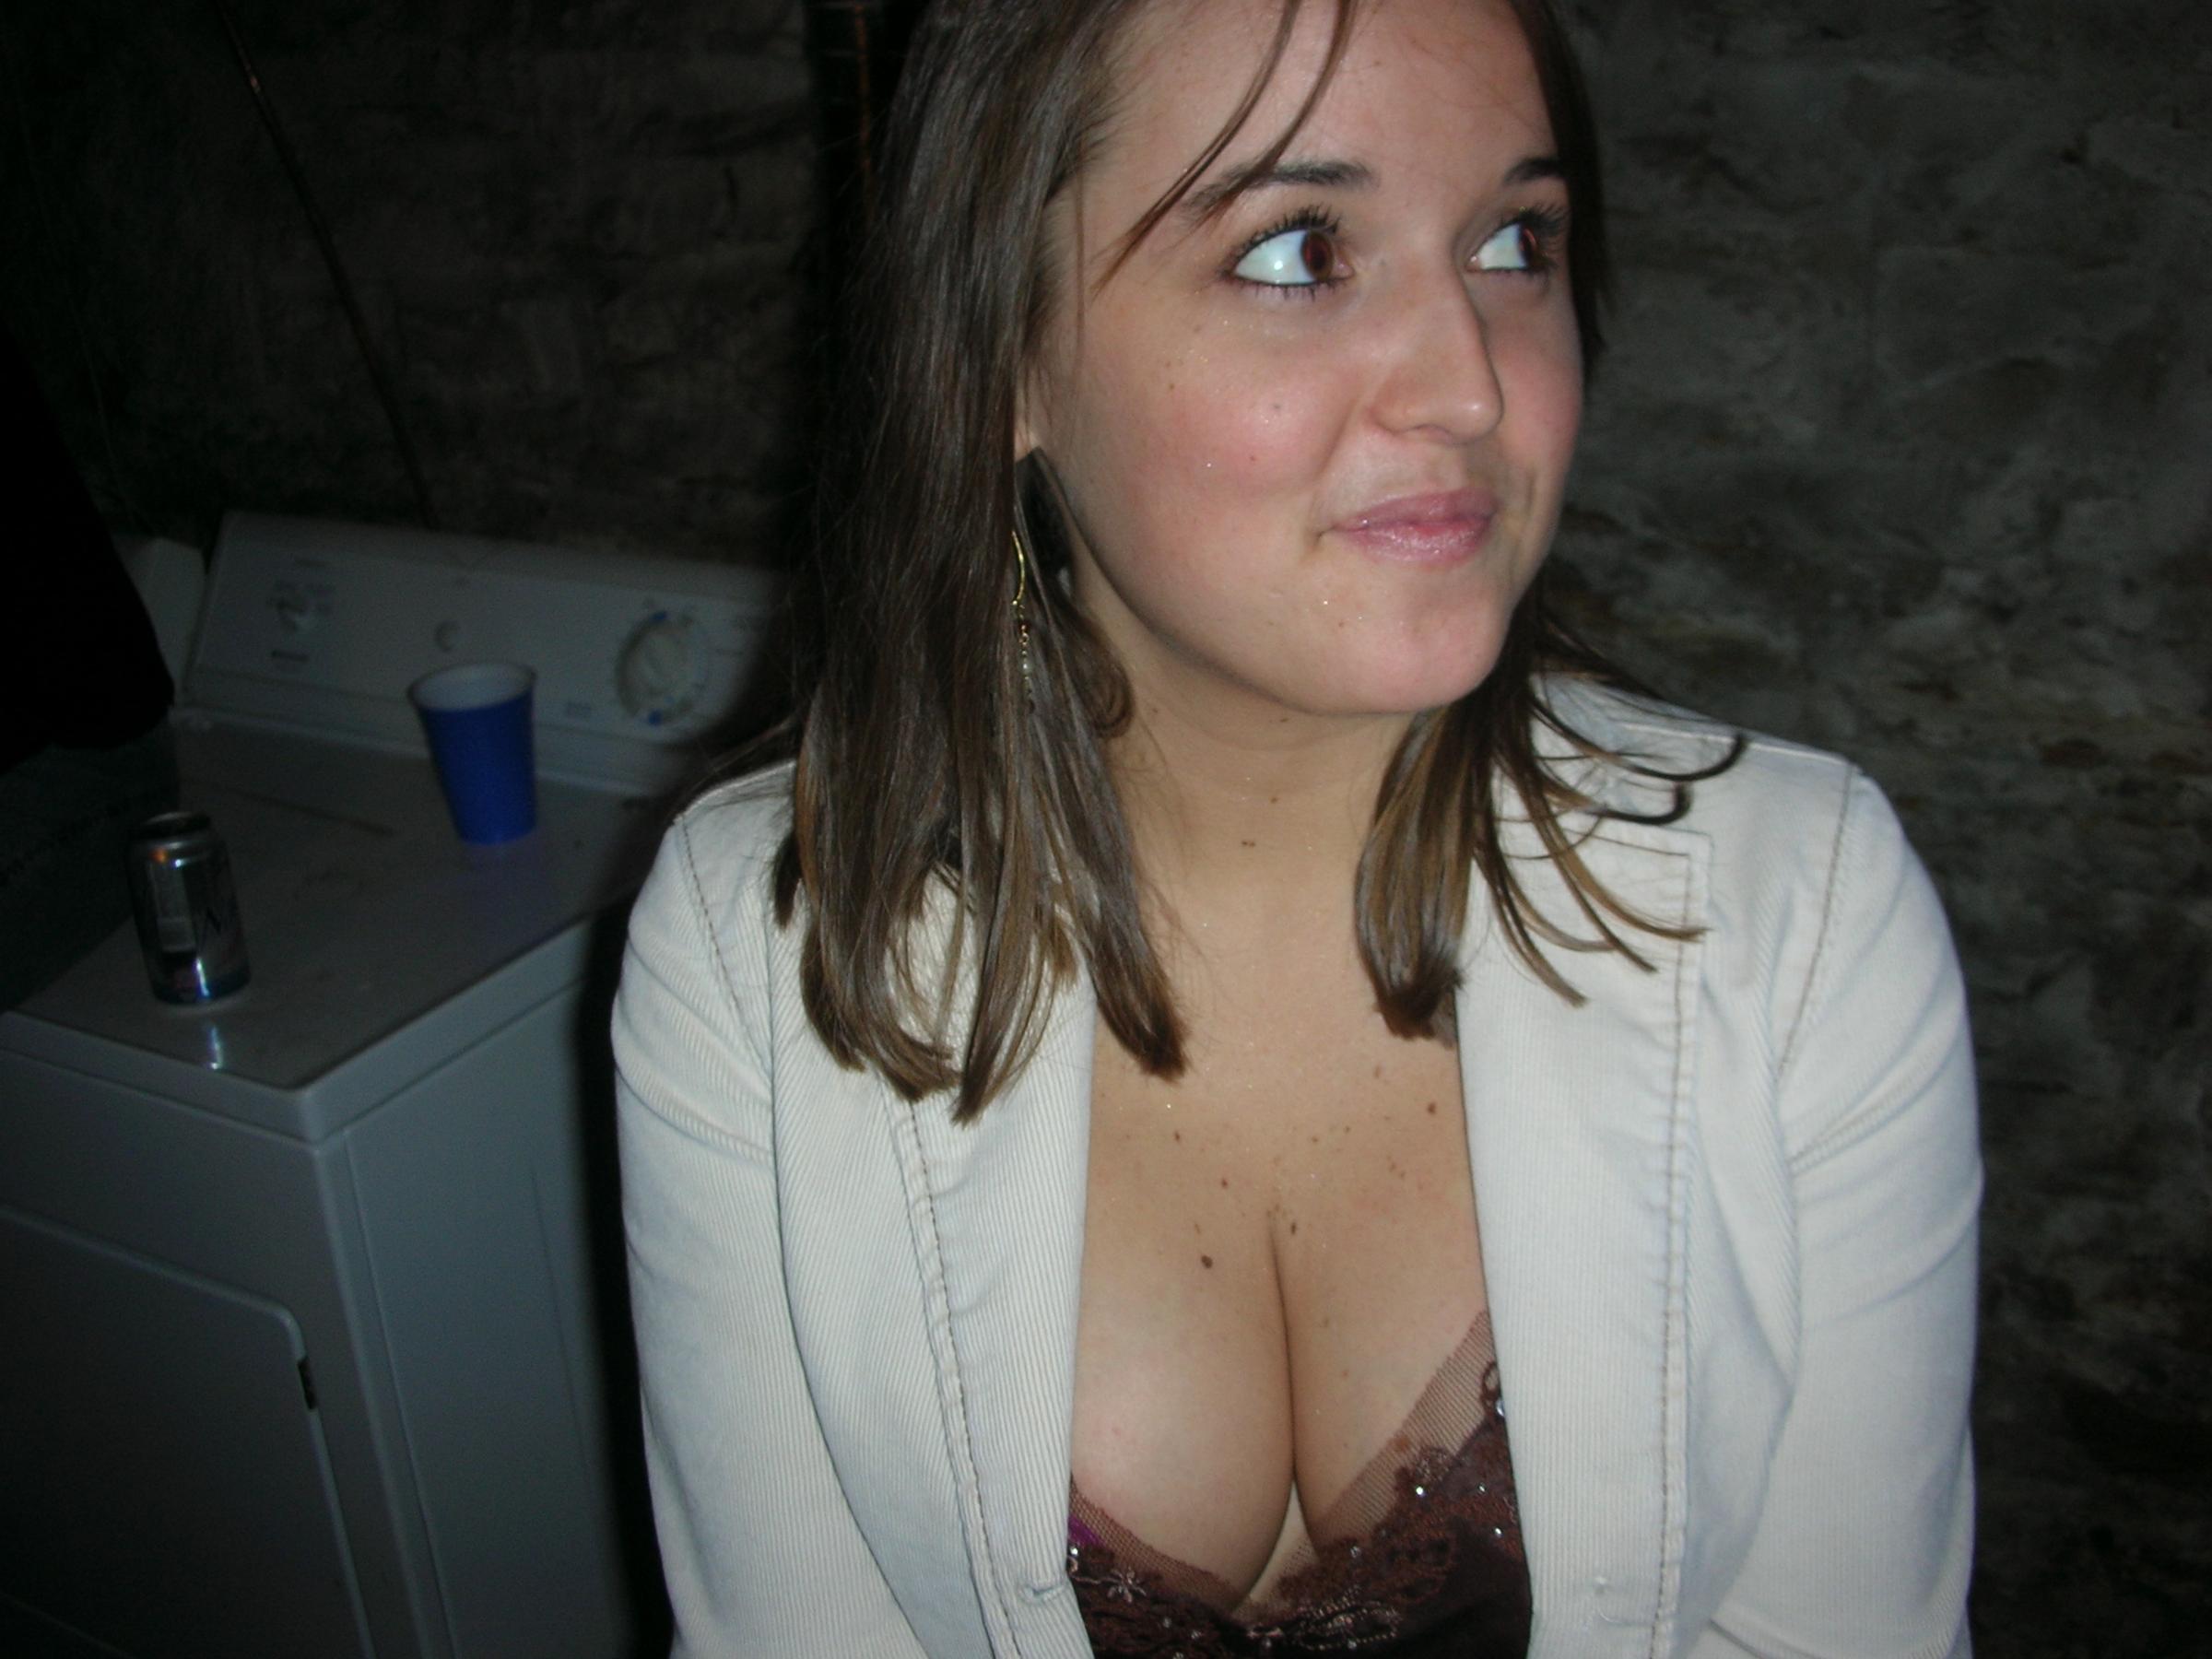 An Extra Dose Of Cleavage